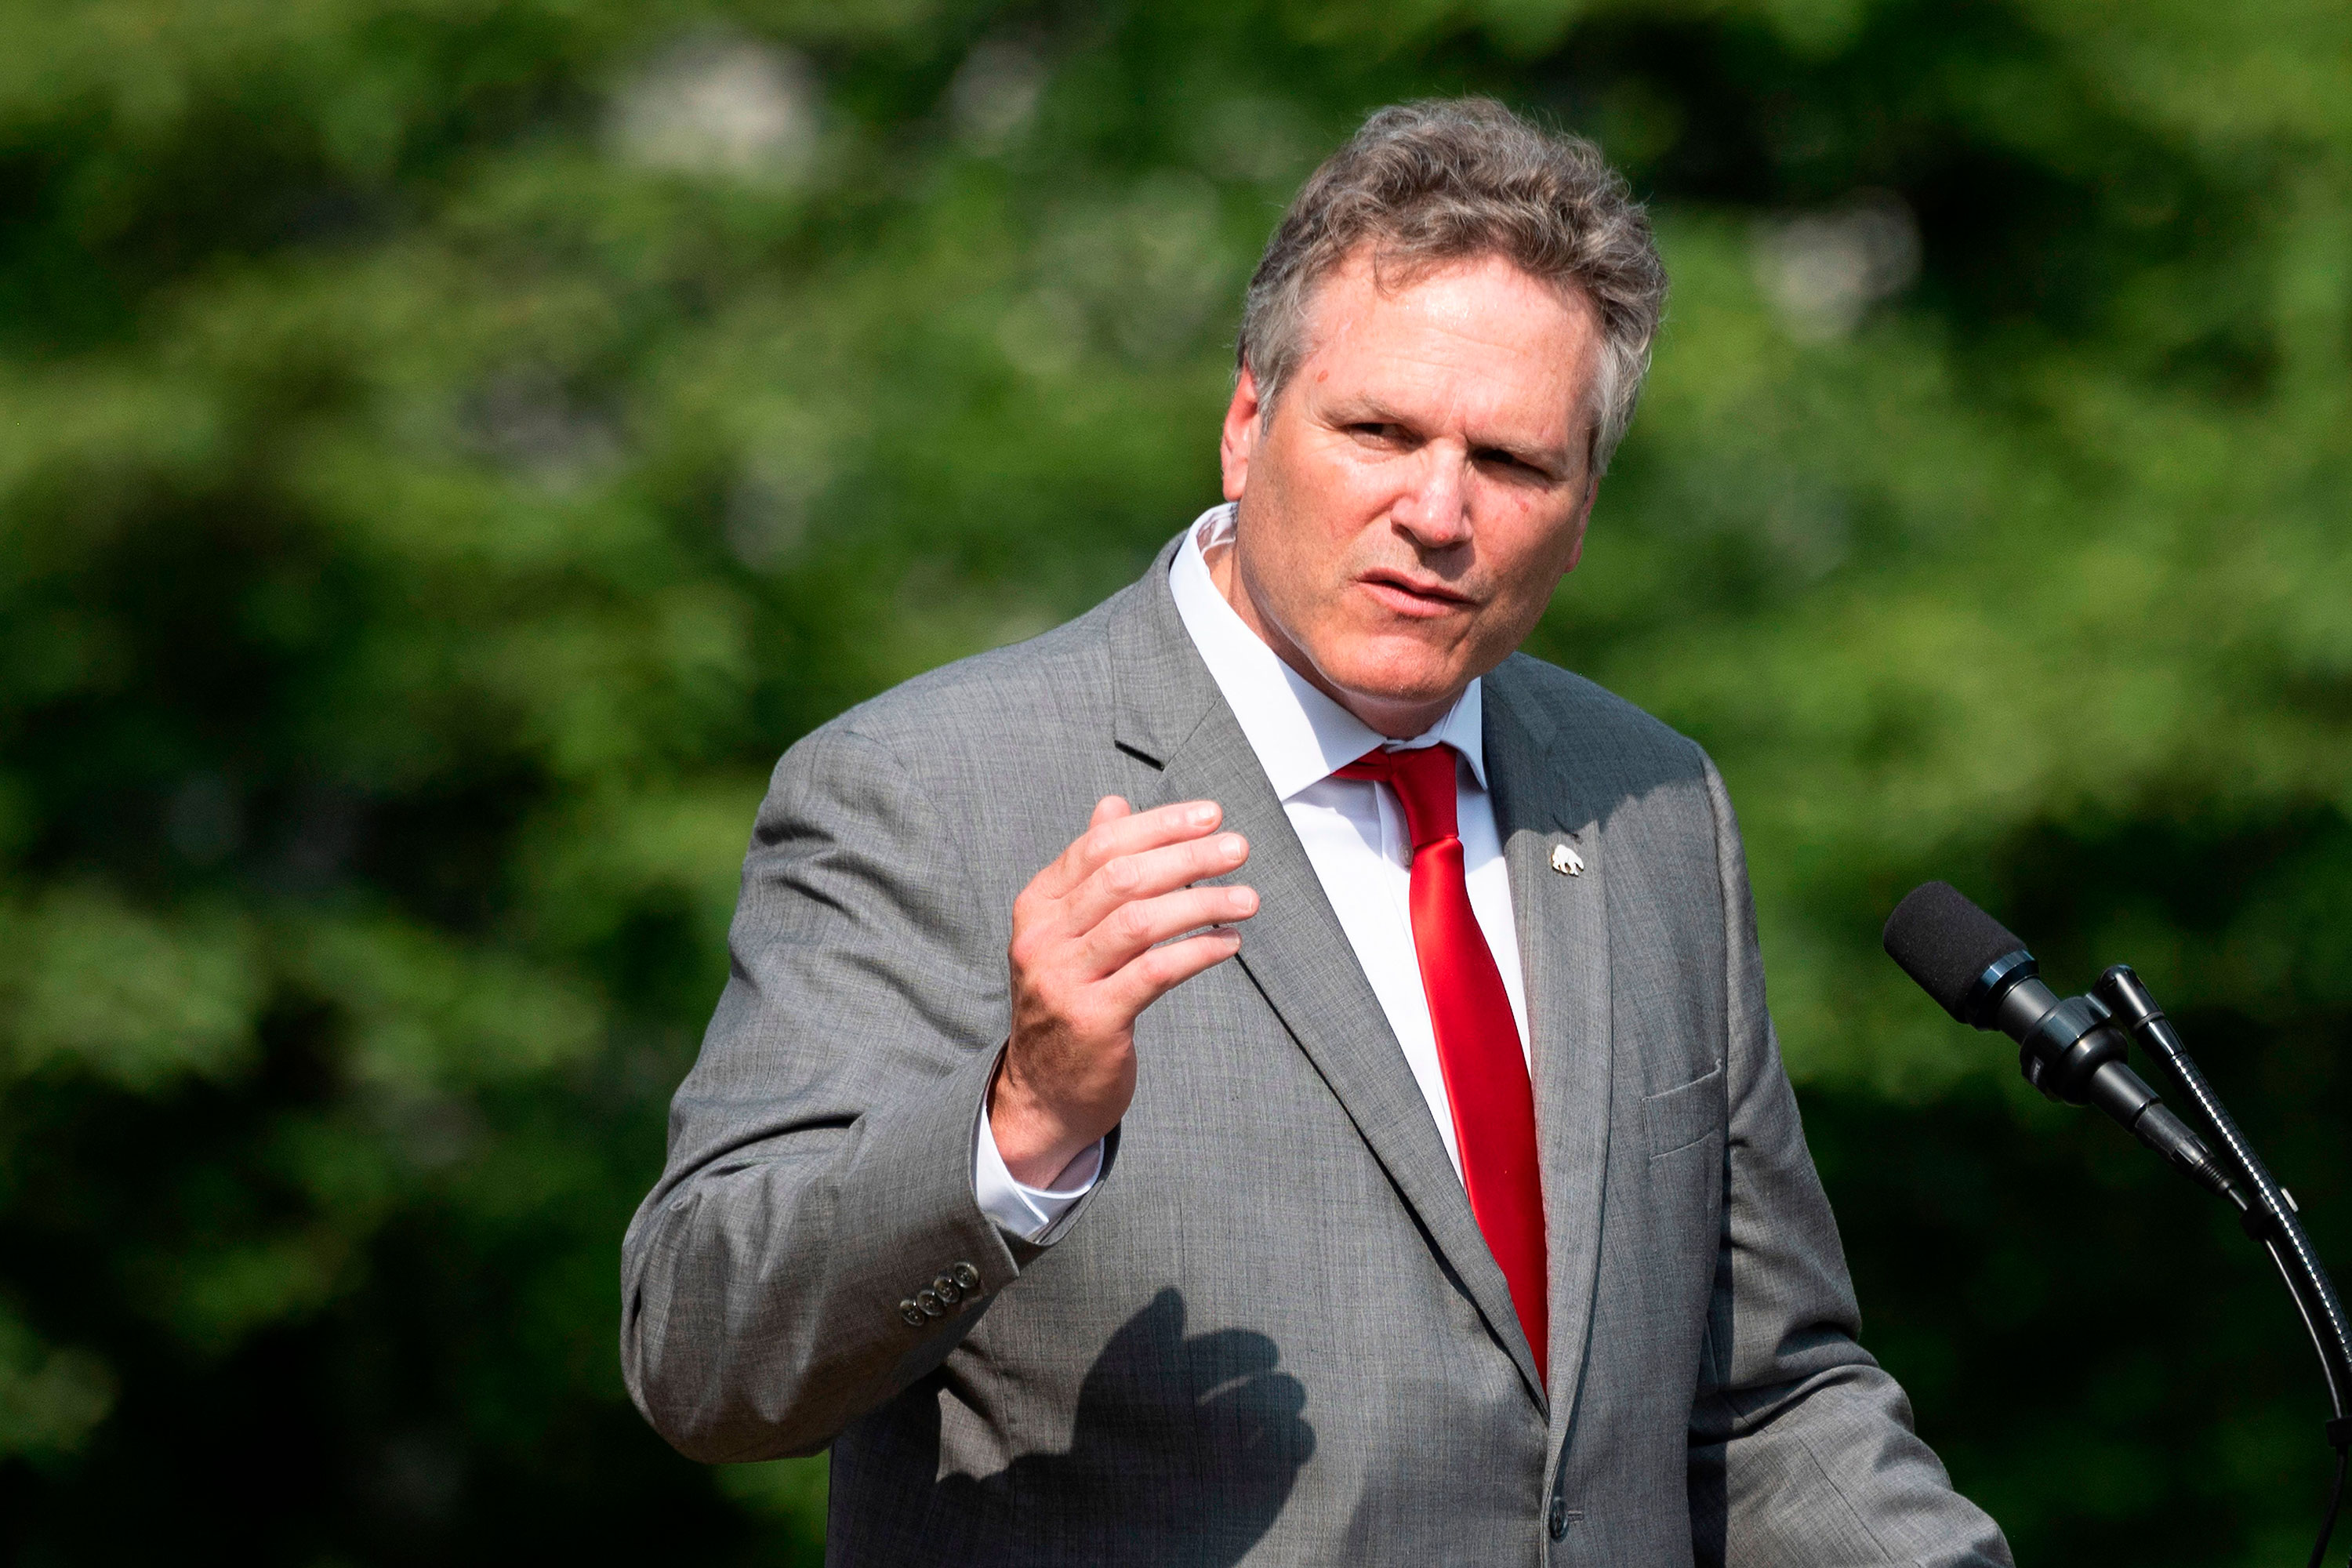 Alaska Governor Mike Dunleavy speaks at the White House on July 16.